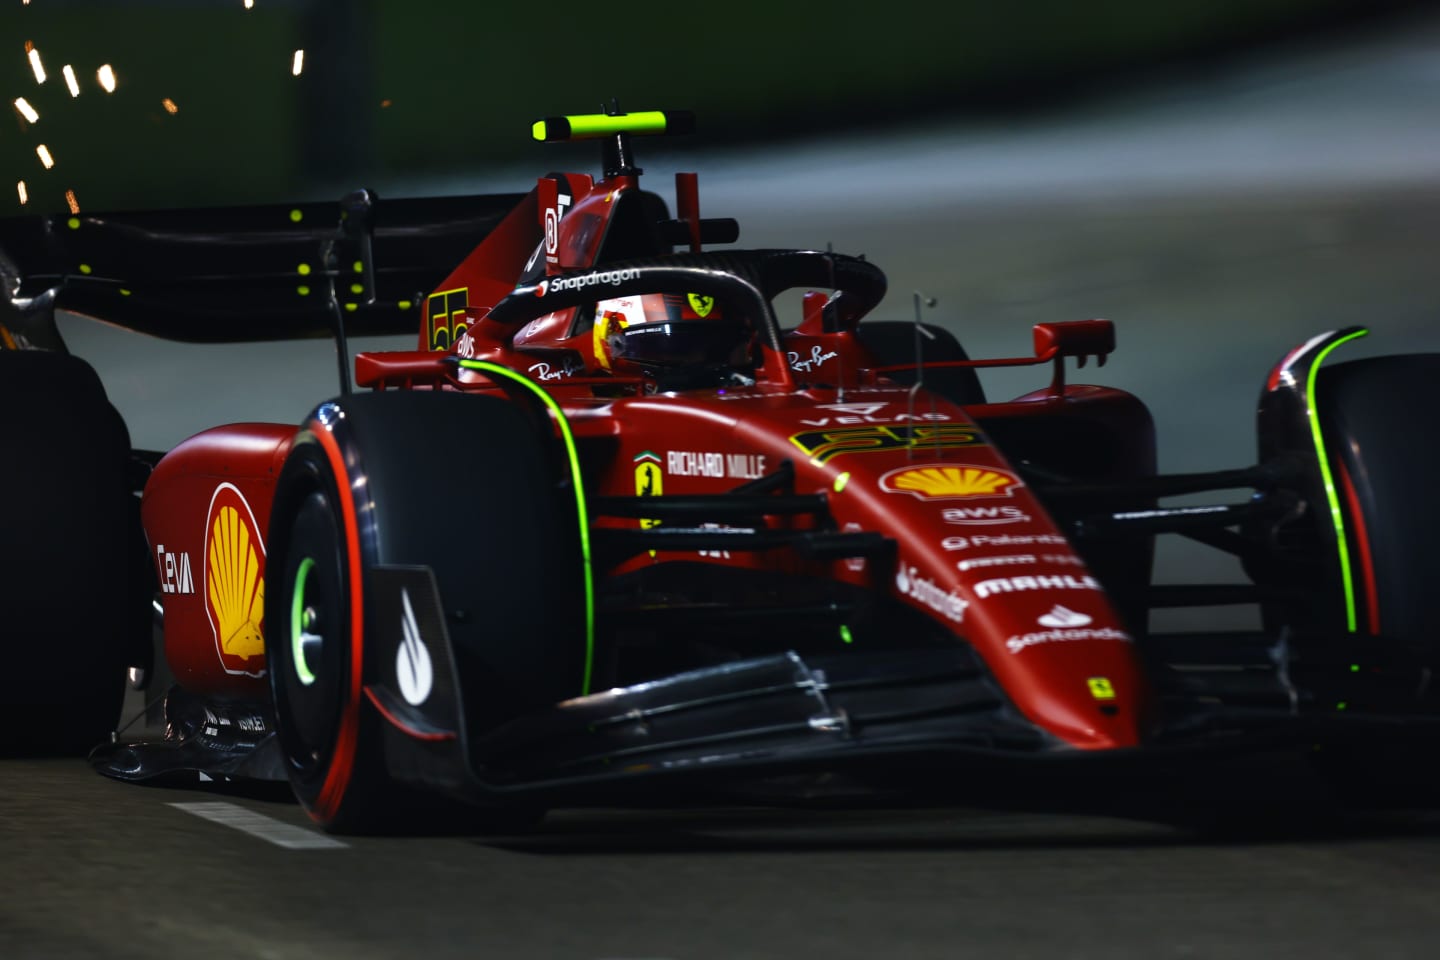 SINGAPORE, SINGAPORE - SEPTEMBER 30: Carlos Sainz of Spain driving (55) the Ferrari F1-75 on track during practice ahead of the F1 Grand Prix of Singapore at Marina Bay Street Circuit on September 30, 2022 in Singapore, Singapore. (Photo by Mark Thompson/Getty Images,)